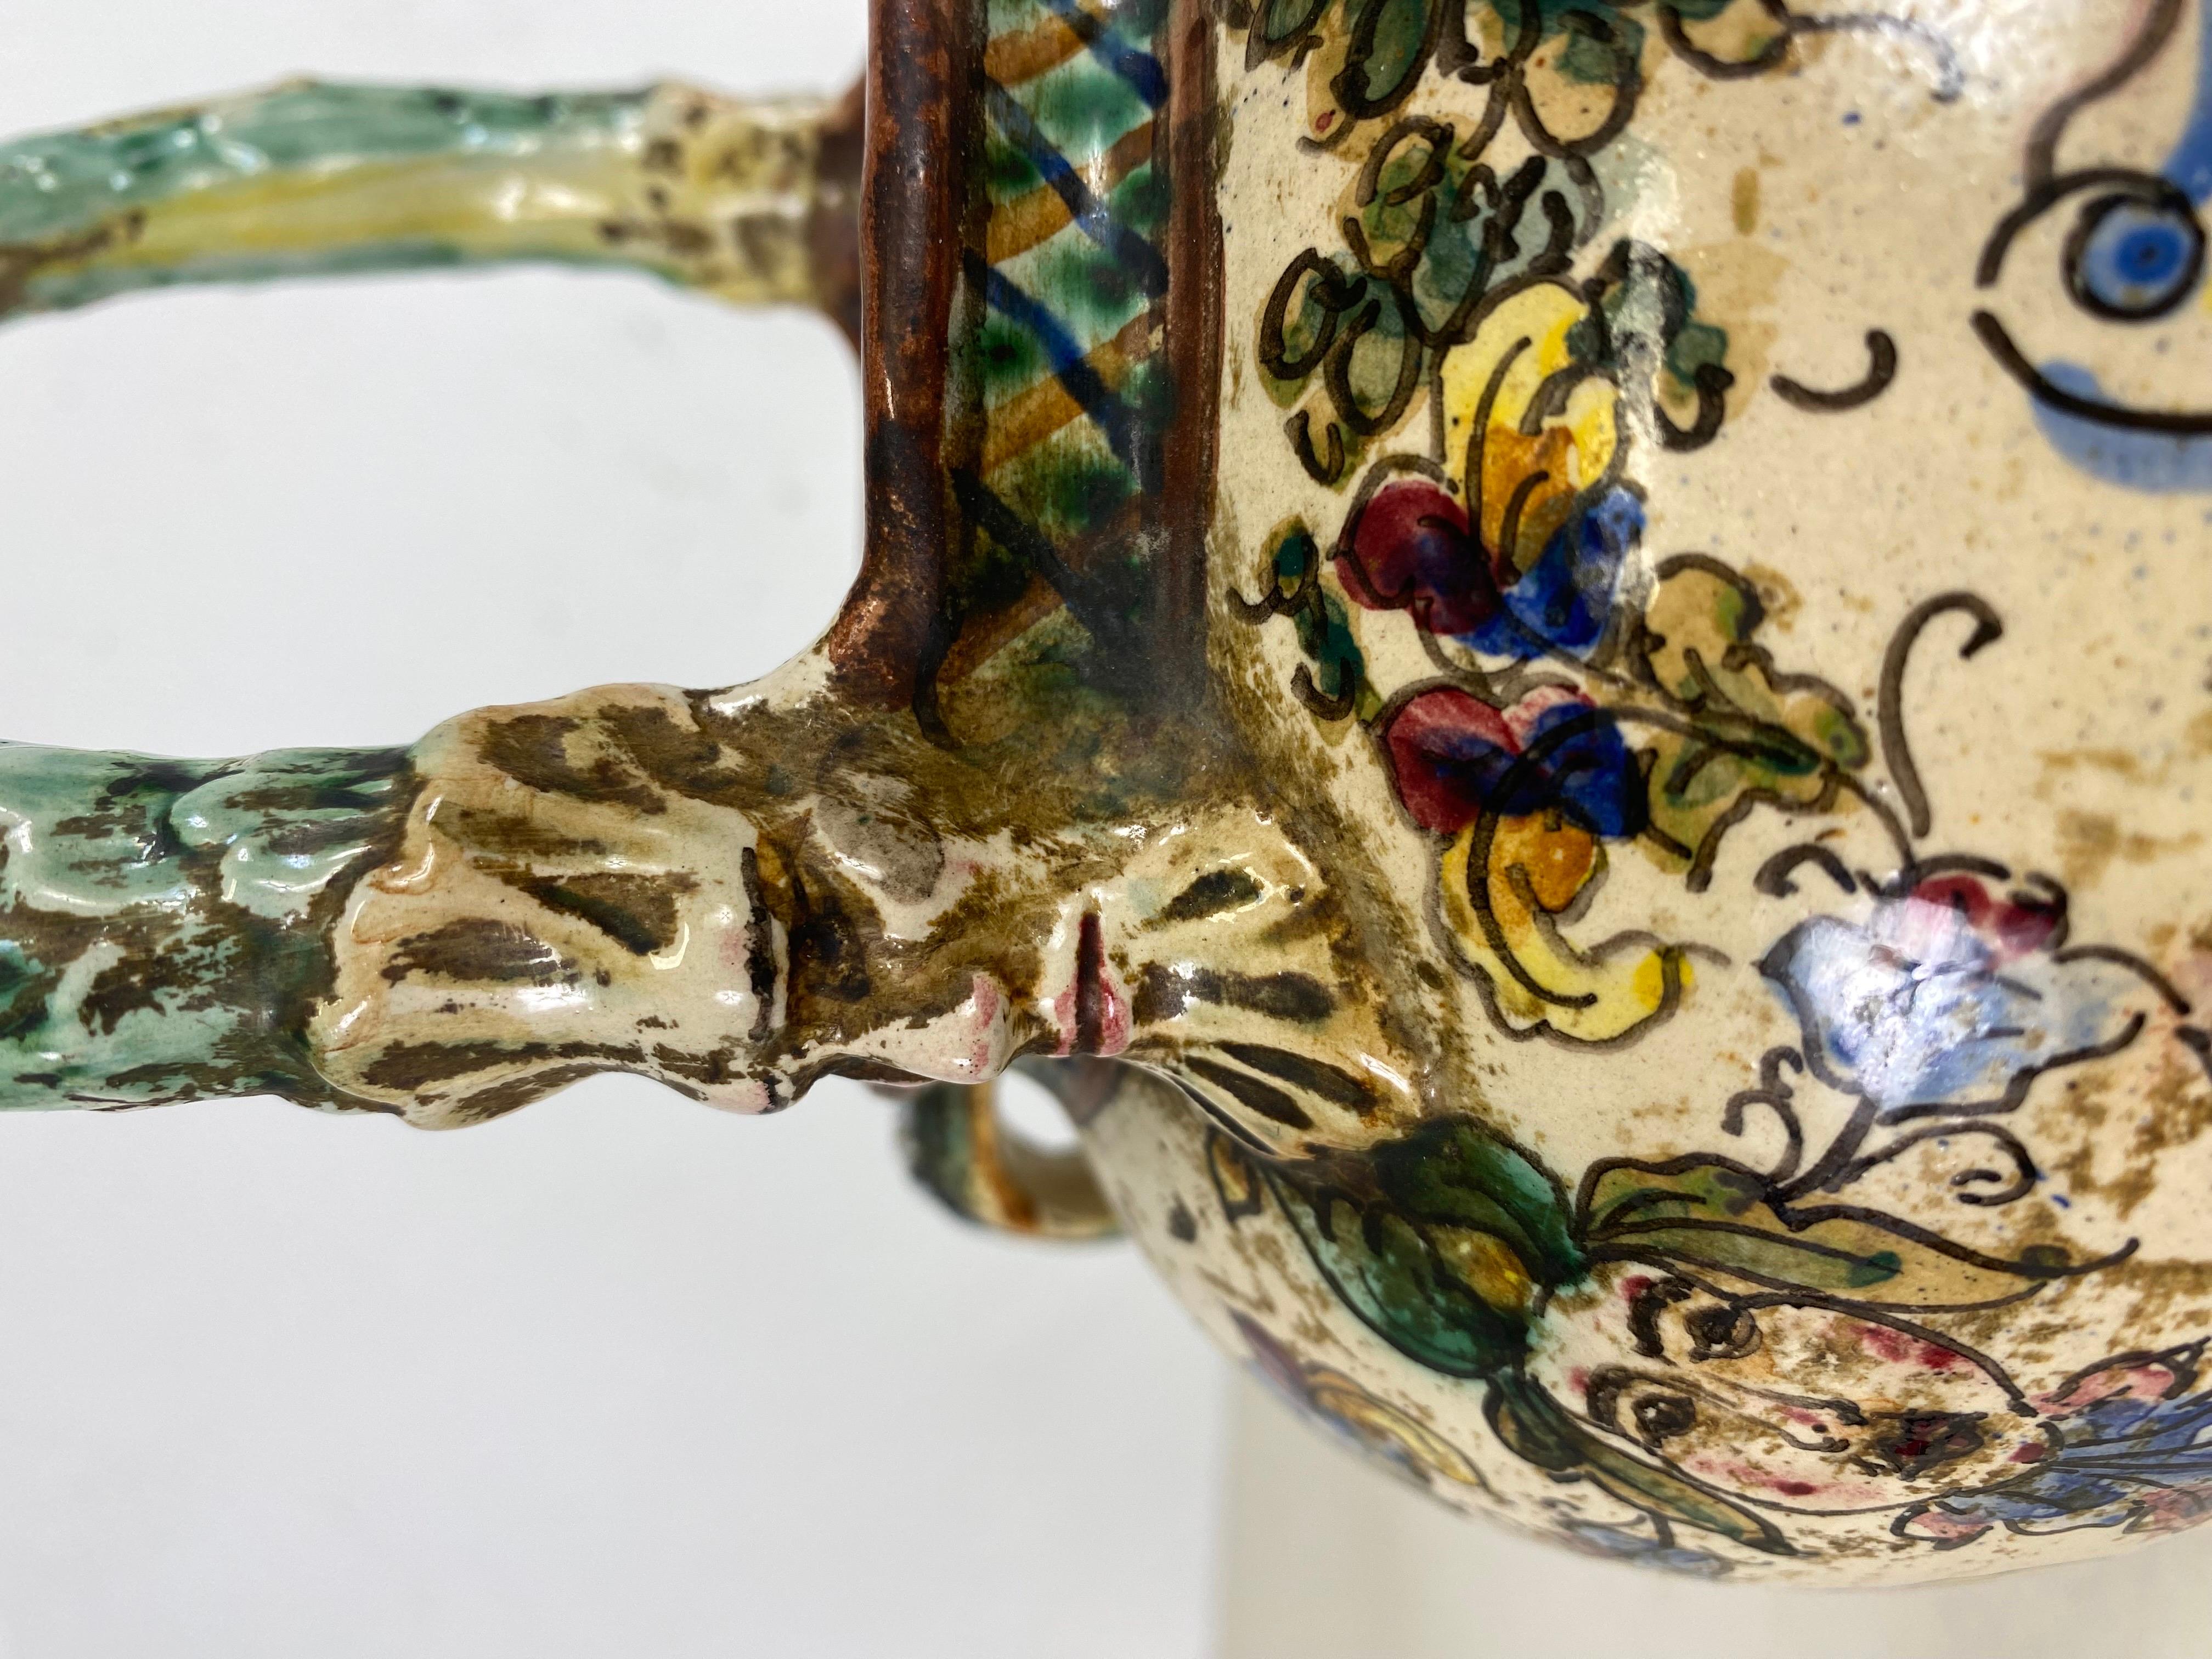 This is an Italian renaissance revival ornately decorated terra-cotta pitcher. This vessel features extraordinary hand-painted figures and flora around the entire surface of this piece. Beautiful tones of vibrant blue, green, yellow, and red. This